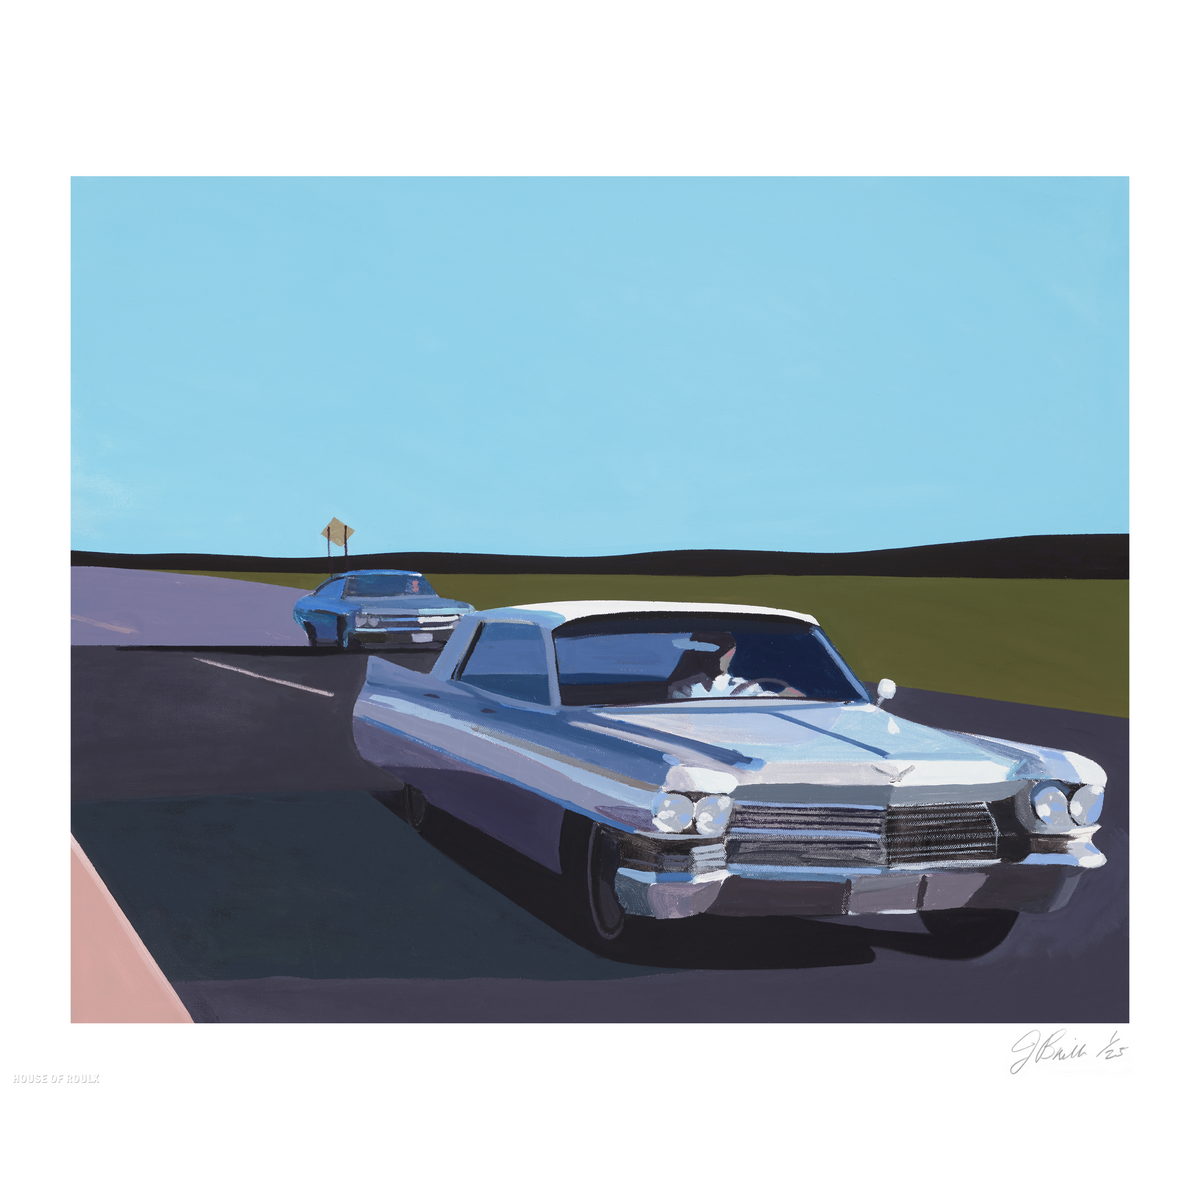 Jessica Brilli &quot;Heading East&quot; - Archival Print, Limited Edition of 25 - 14 x 17&quot;